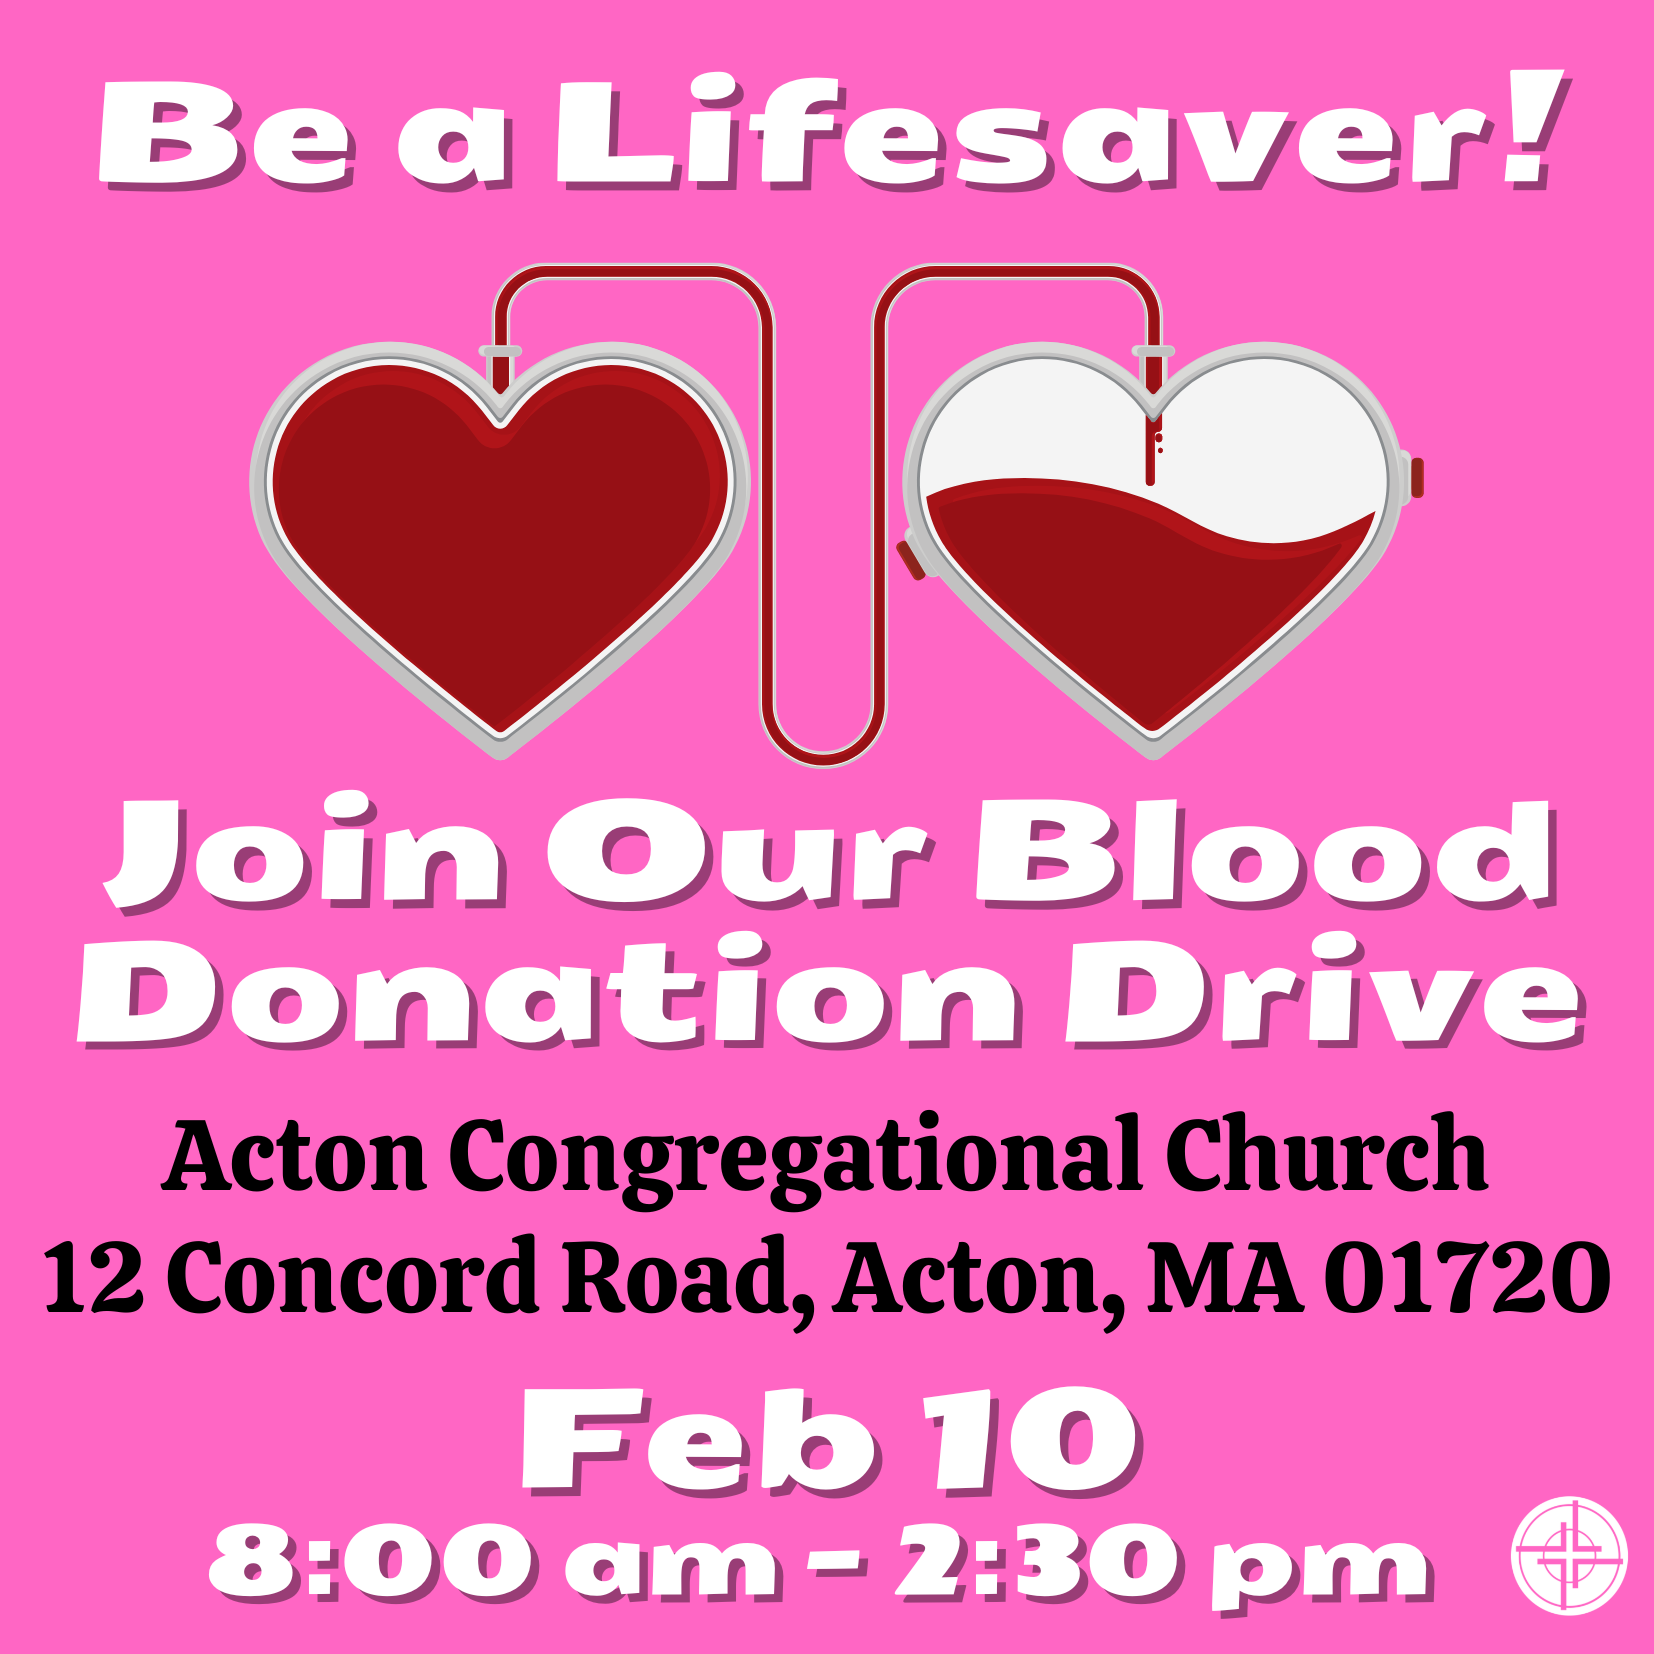 Be a Lifesaver! Join our Blood Donation Drive.  Acton Congregational Church, 12 Concord Road, Acton, MA 01720 on Feb 10 8:00am to 2:30pm.